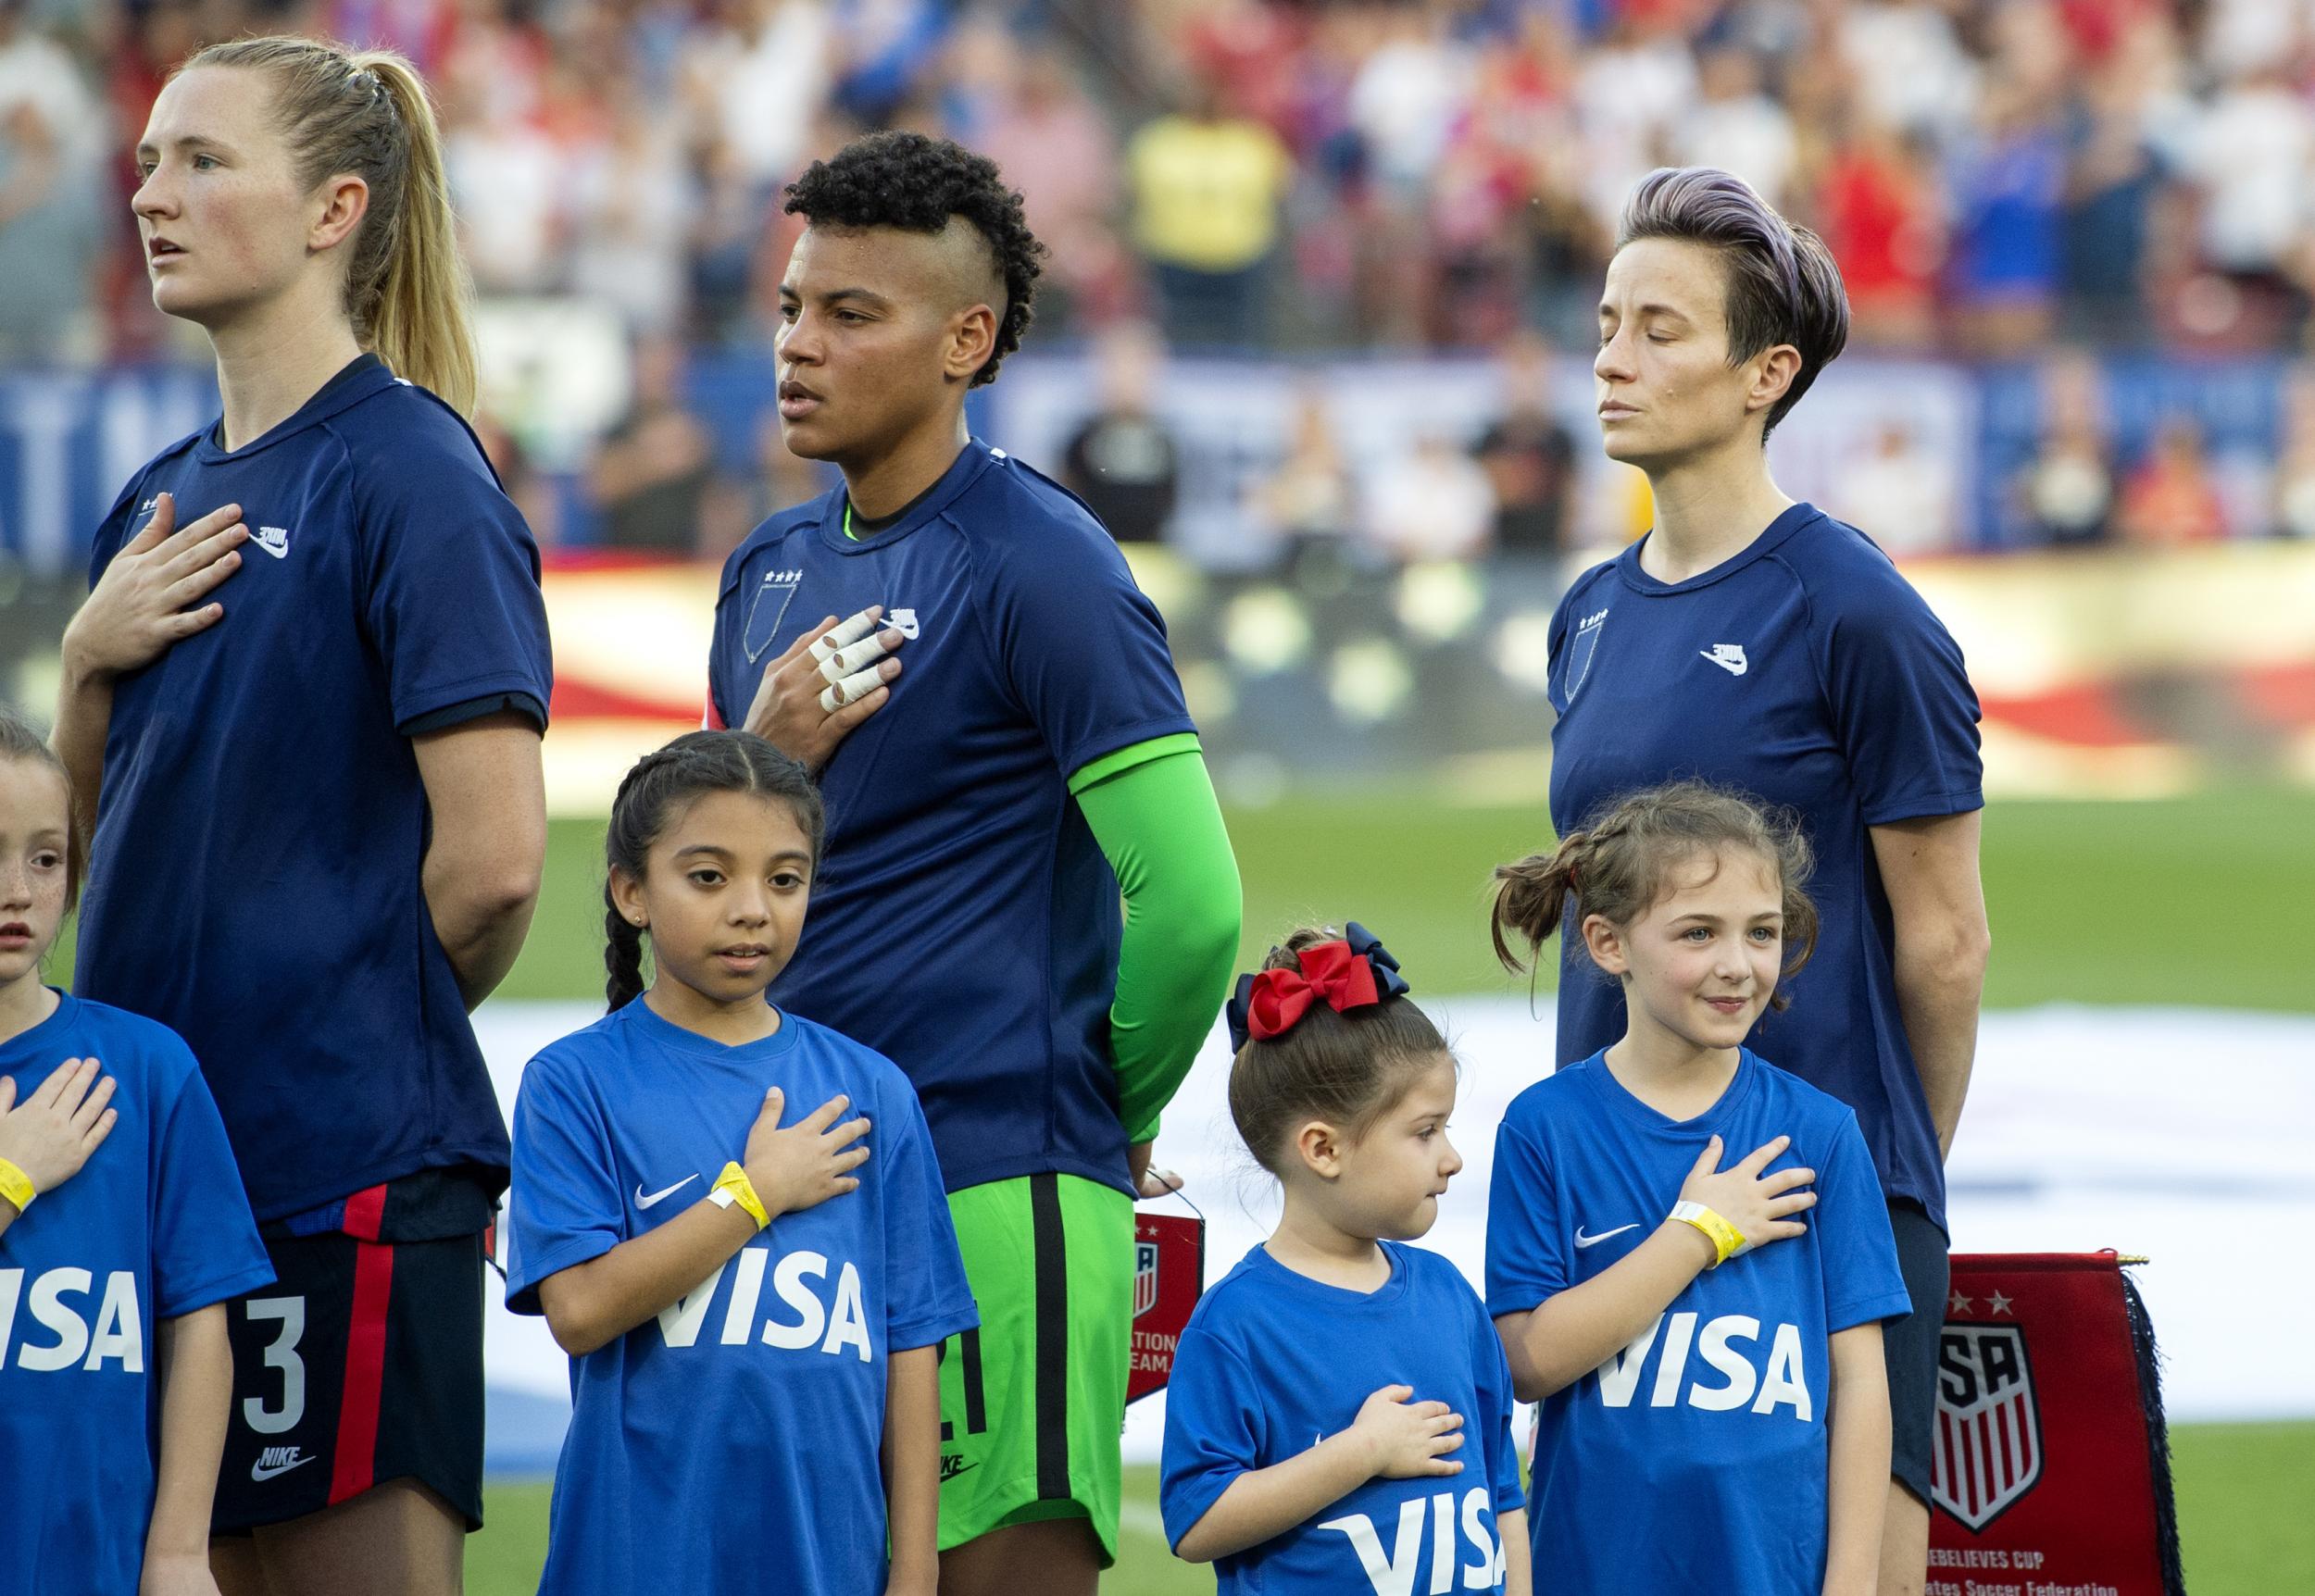 US women's national team players, including Megan Rapinoe (right) stand with their jerseys turned inside out during the playing of the national anthem before a SheBelieves Cup women's soccer match against Japan